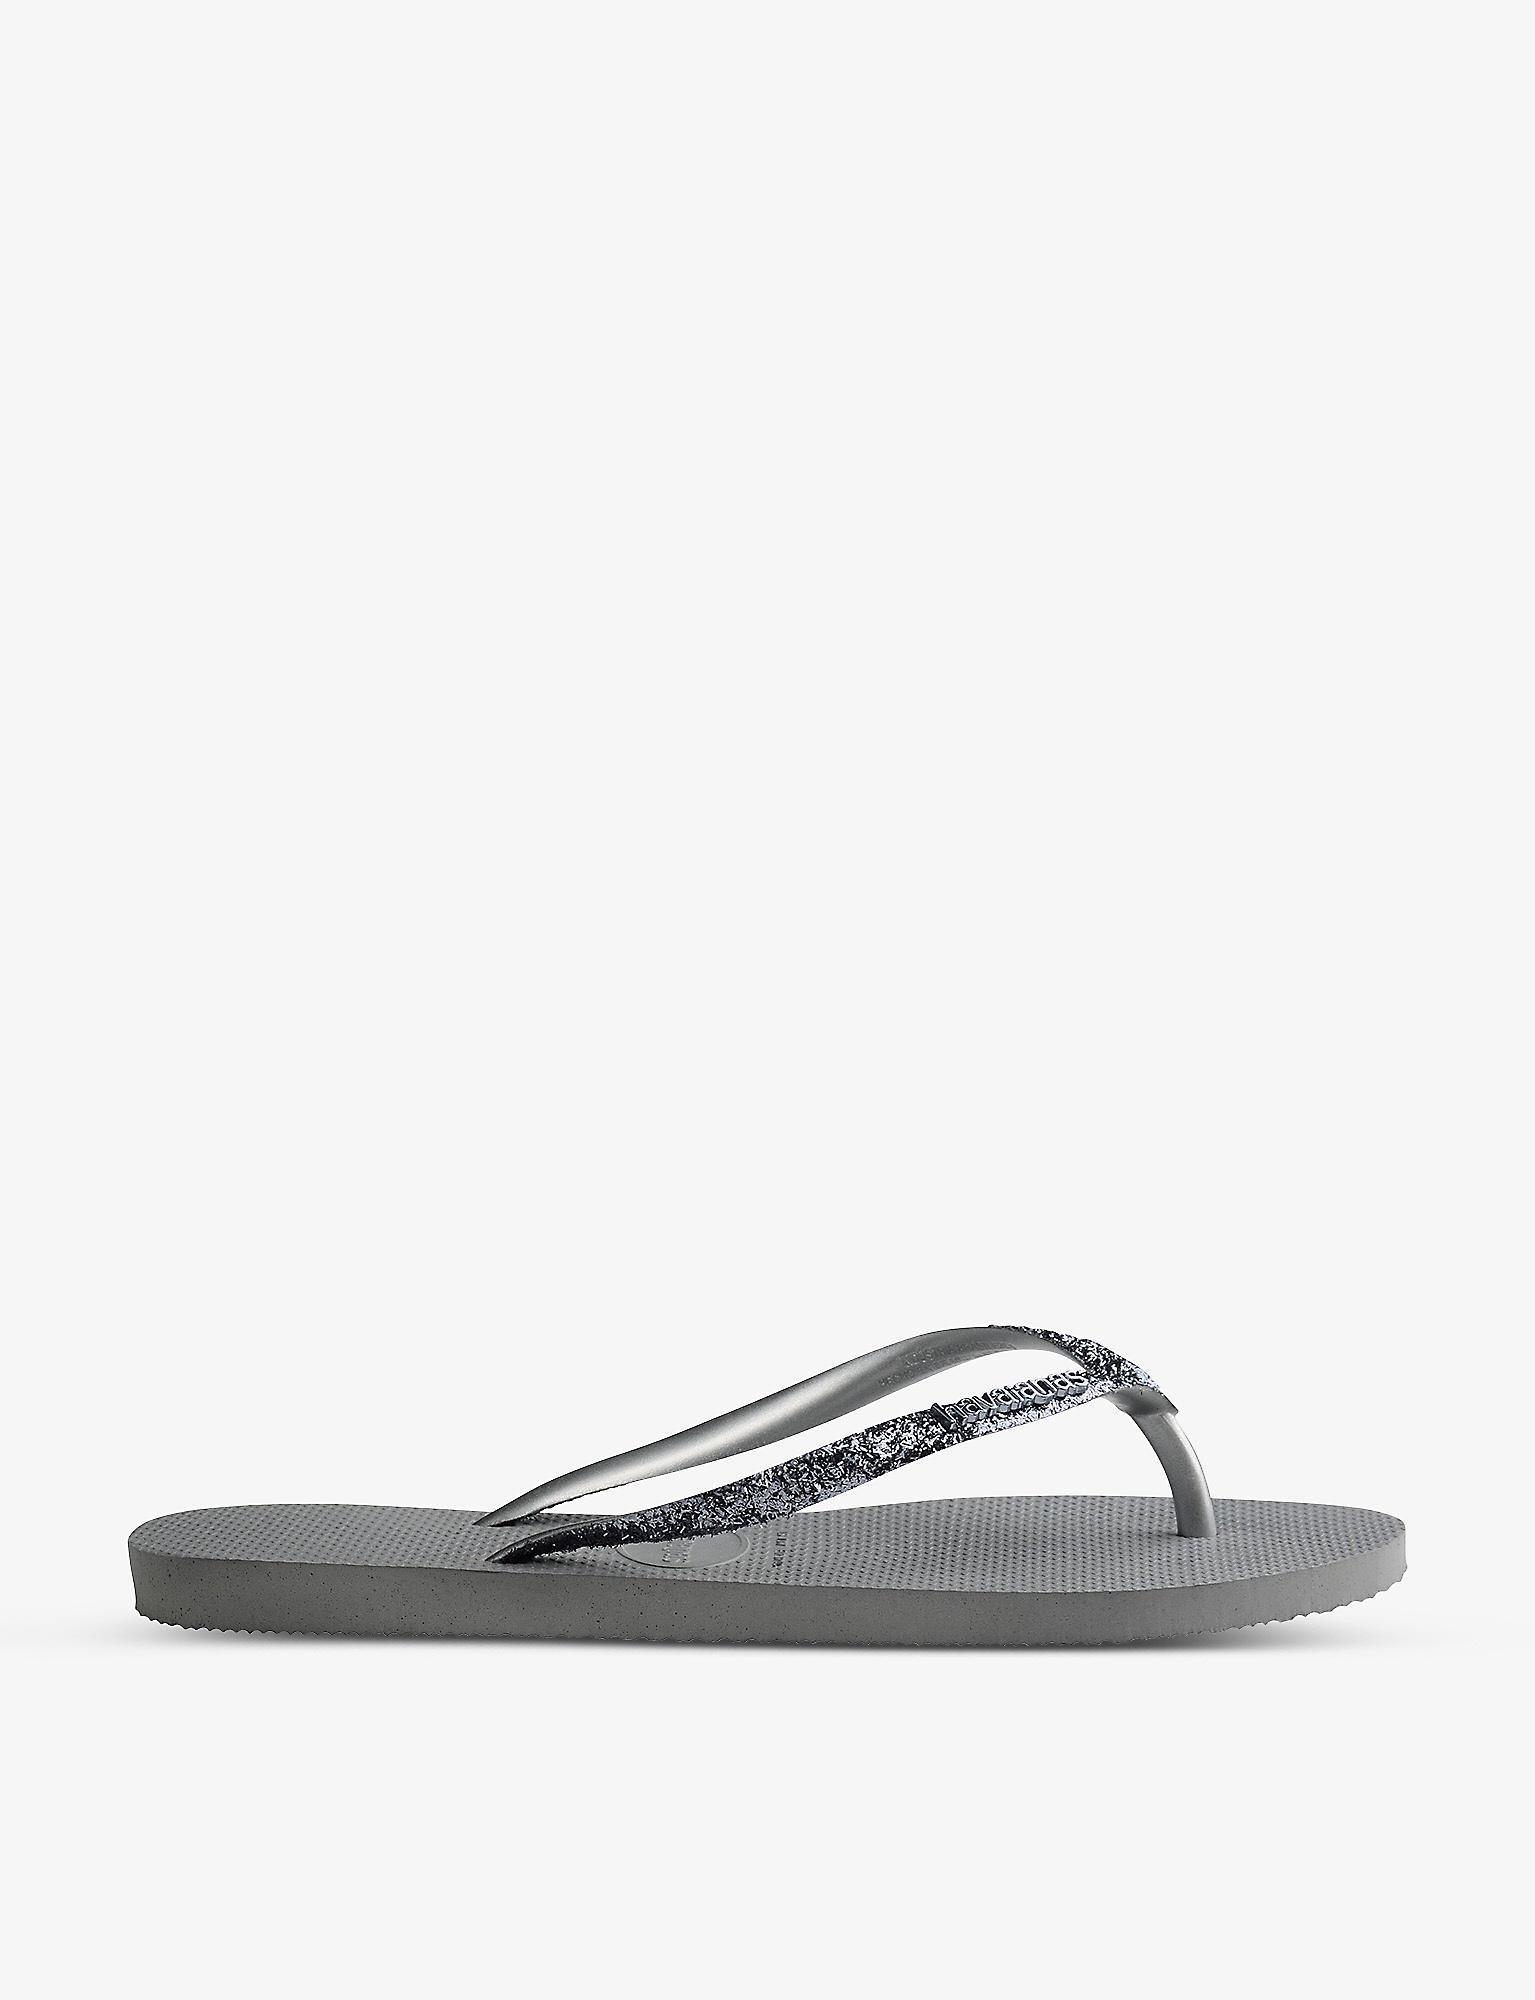 Havaianas Slim Glitter Rubber Flip-flops in Grey Womens Shoes Flats and flat shoes Sandals and flip-flops Grey 